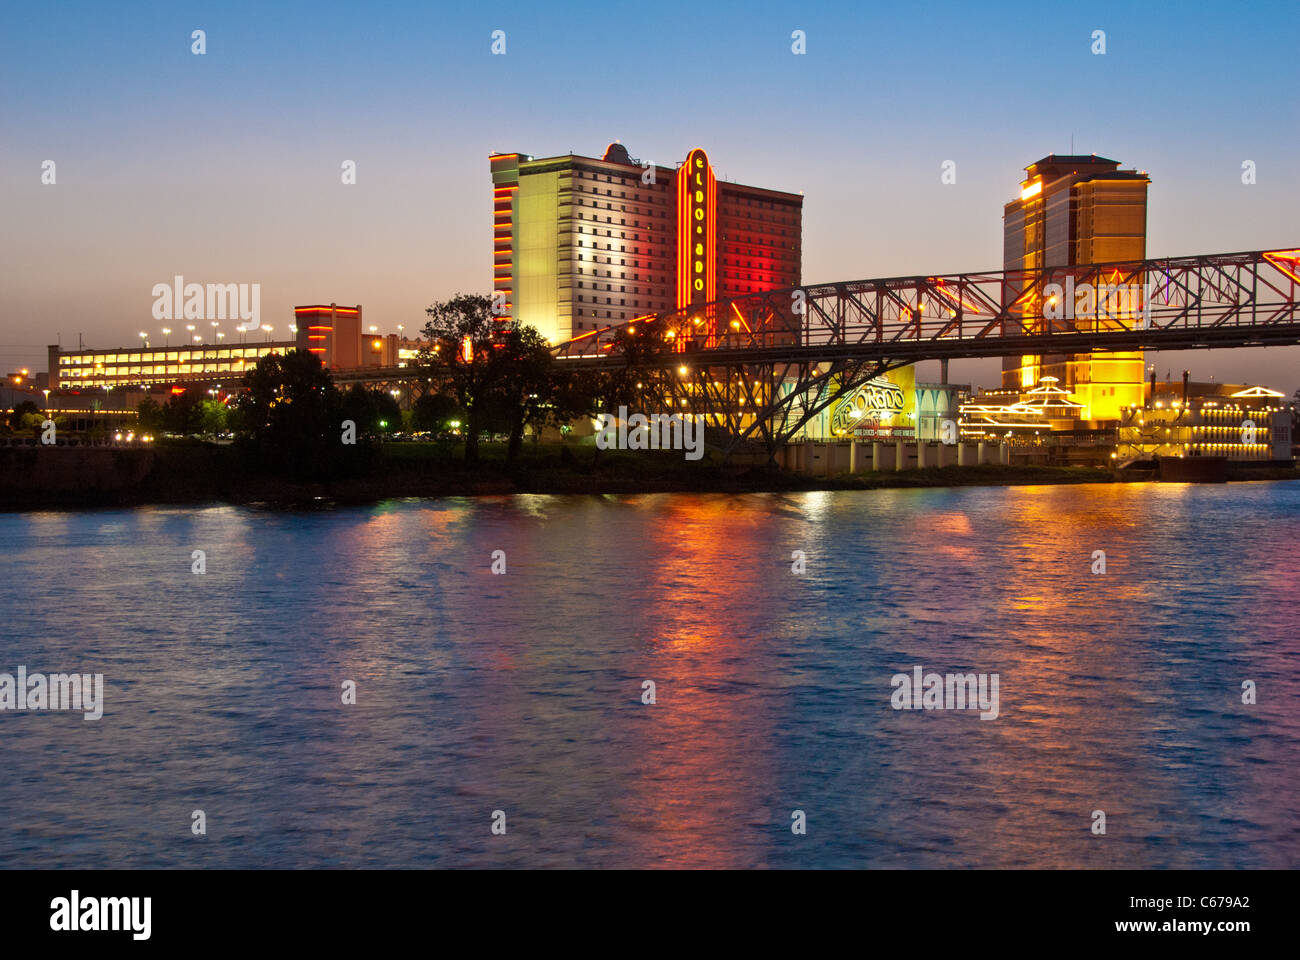 Riverfront casino district along the Red River in Shreveport, Louisiana, USA Stock Photo